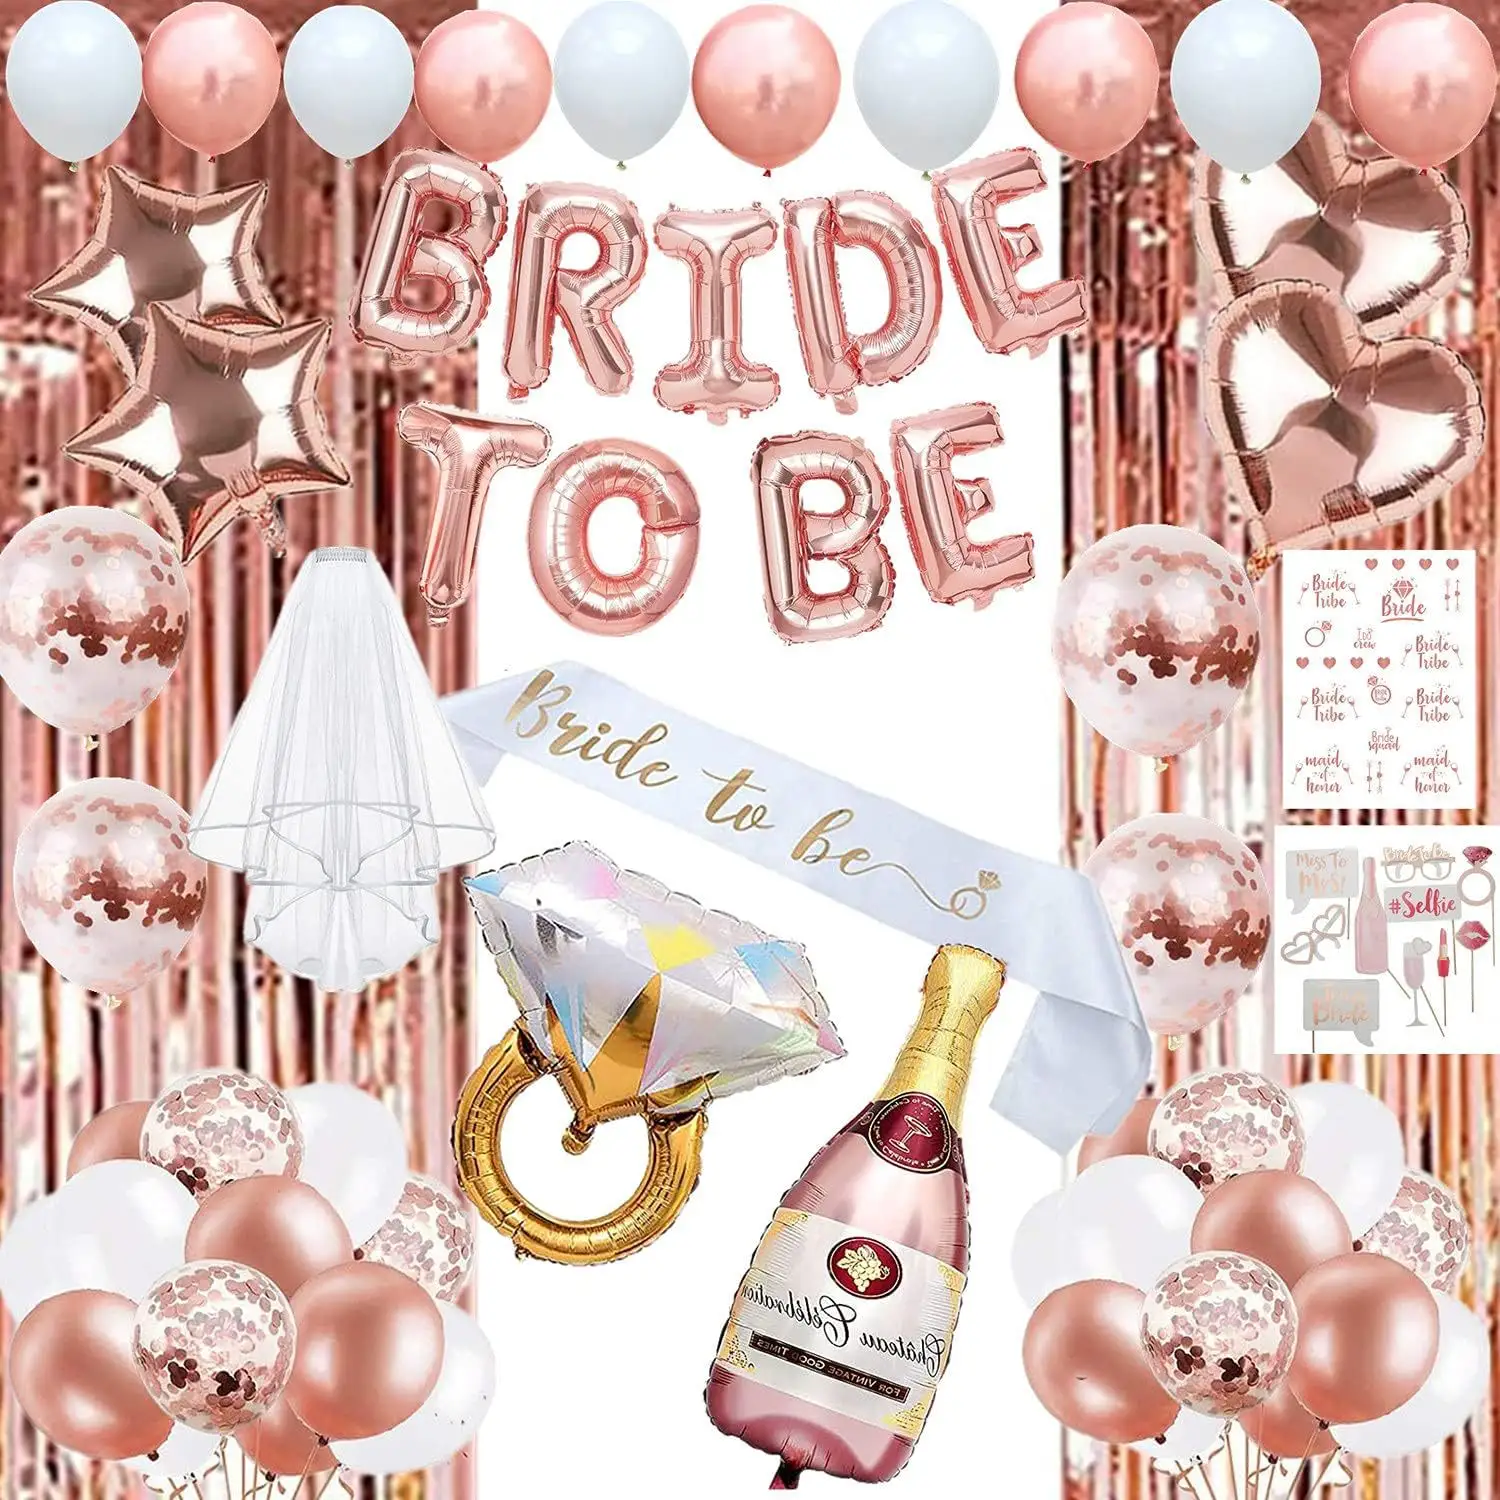 Team Bride Bachelorette Party Sets Single Girl Party Decoration Rose Gold Balloons Set Bride To Be Bride's Wedding Single Party